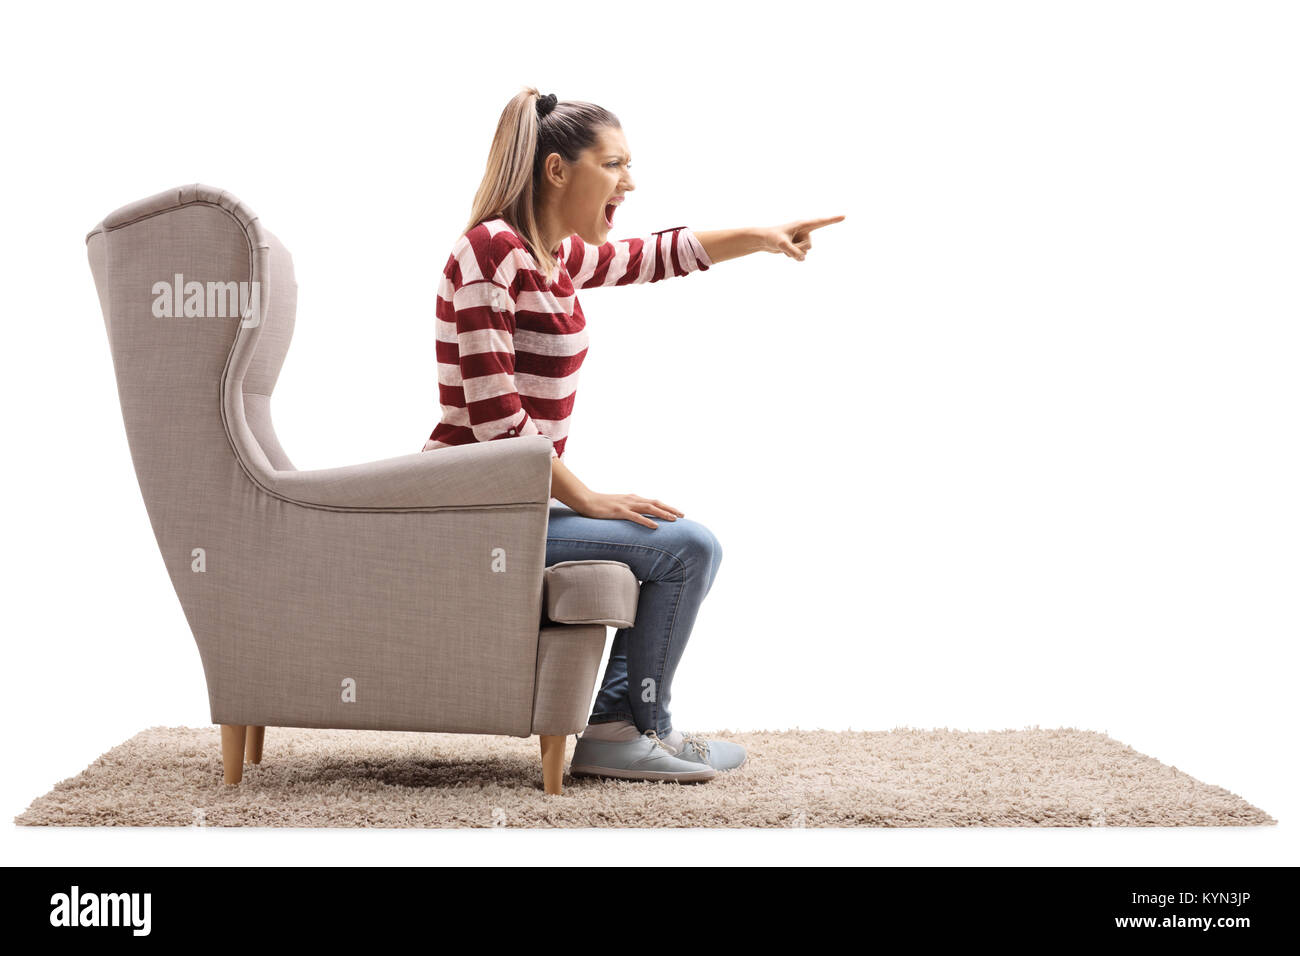 Angry young woman sitting in an armchair and arguing with someone isolated on white background Stock Photo